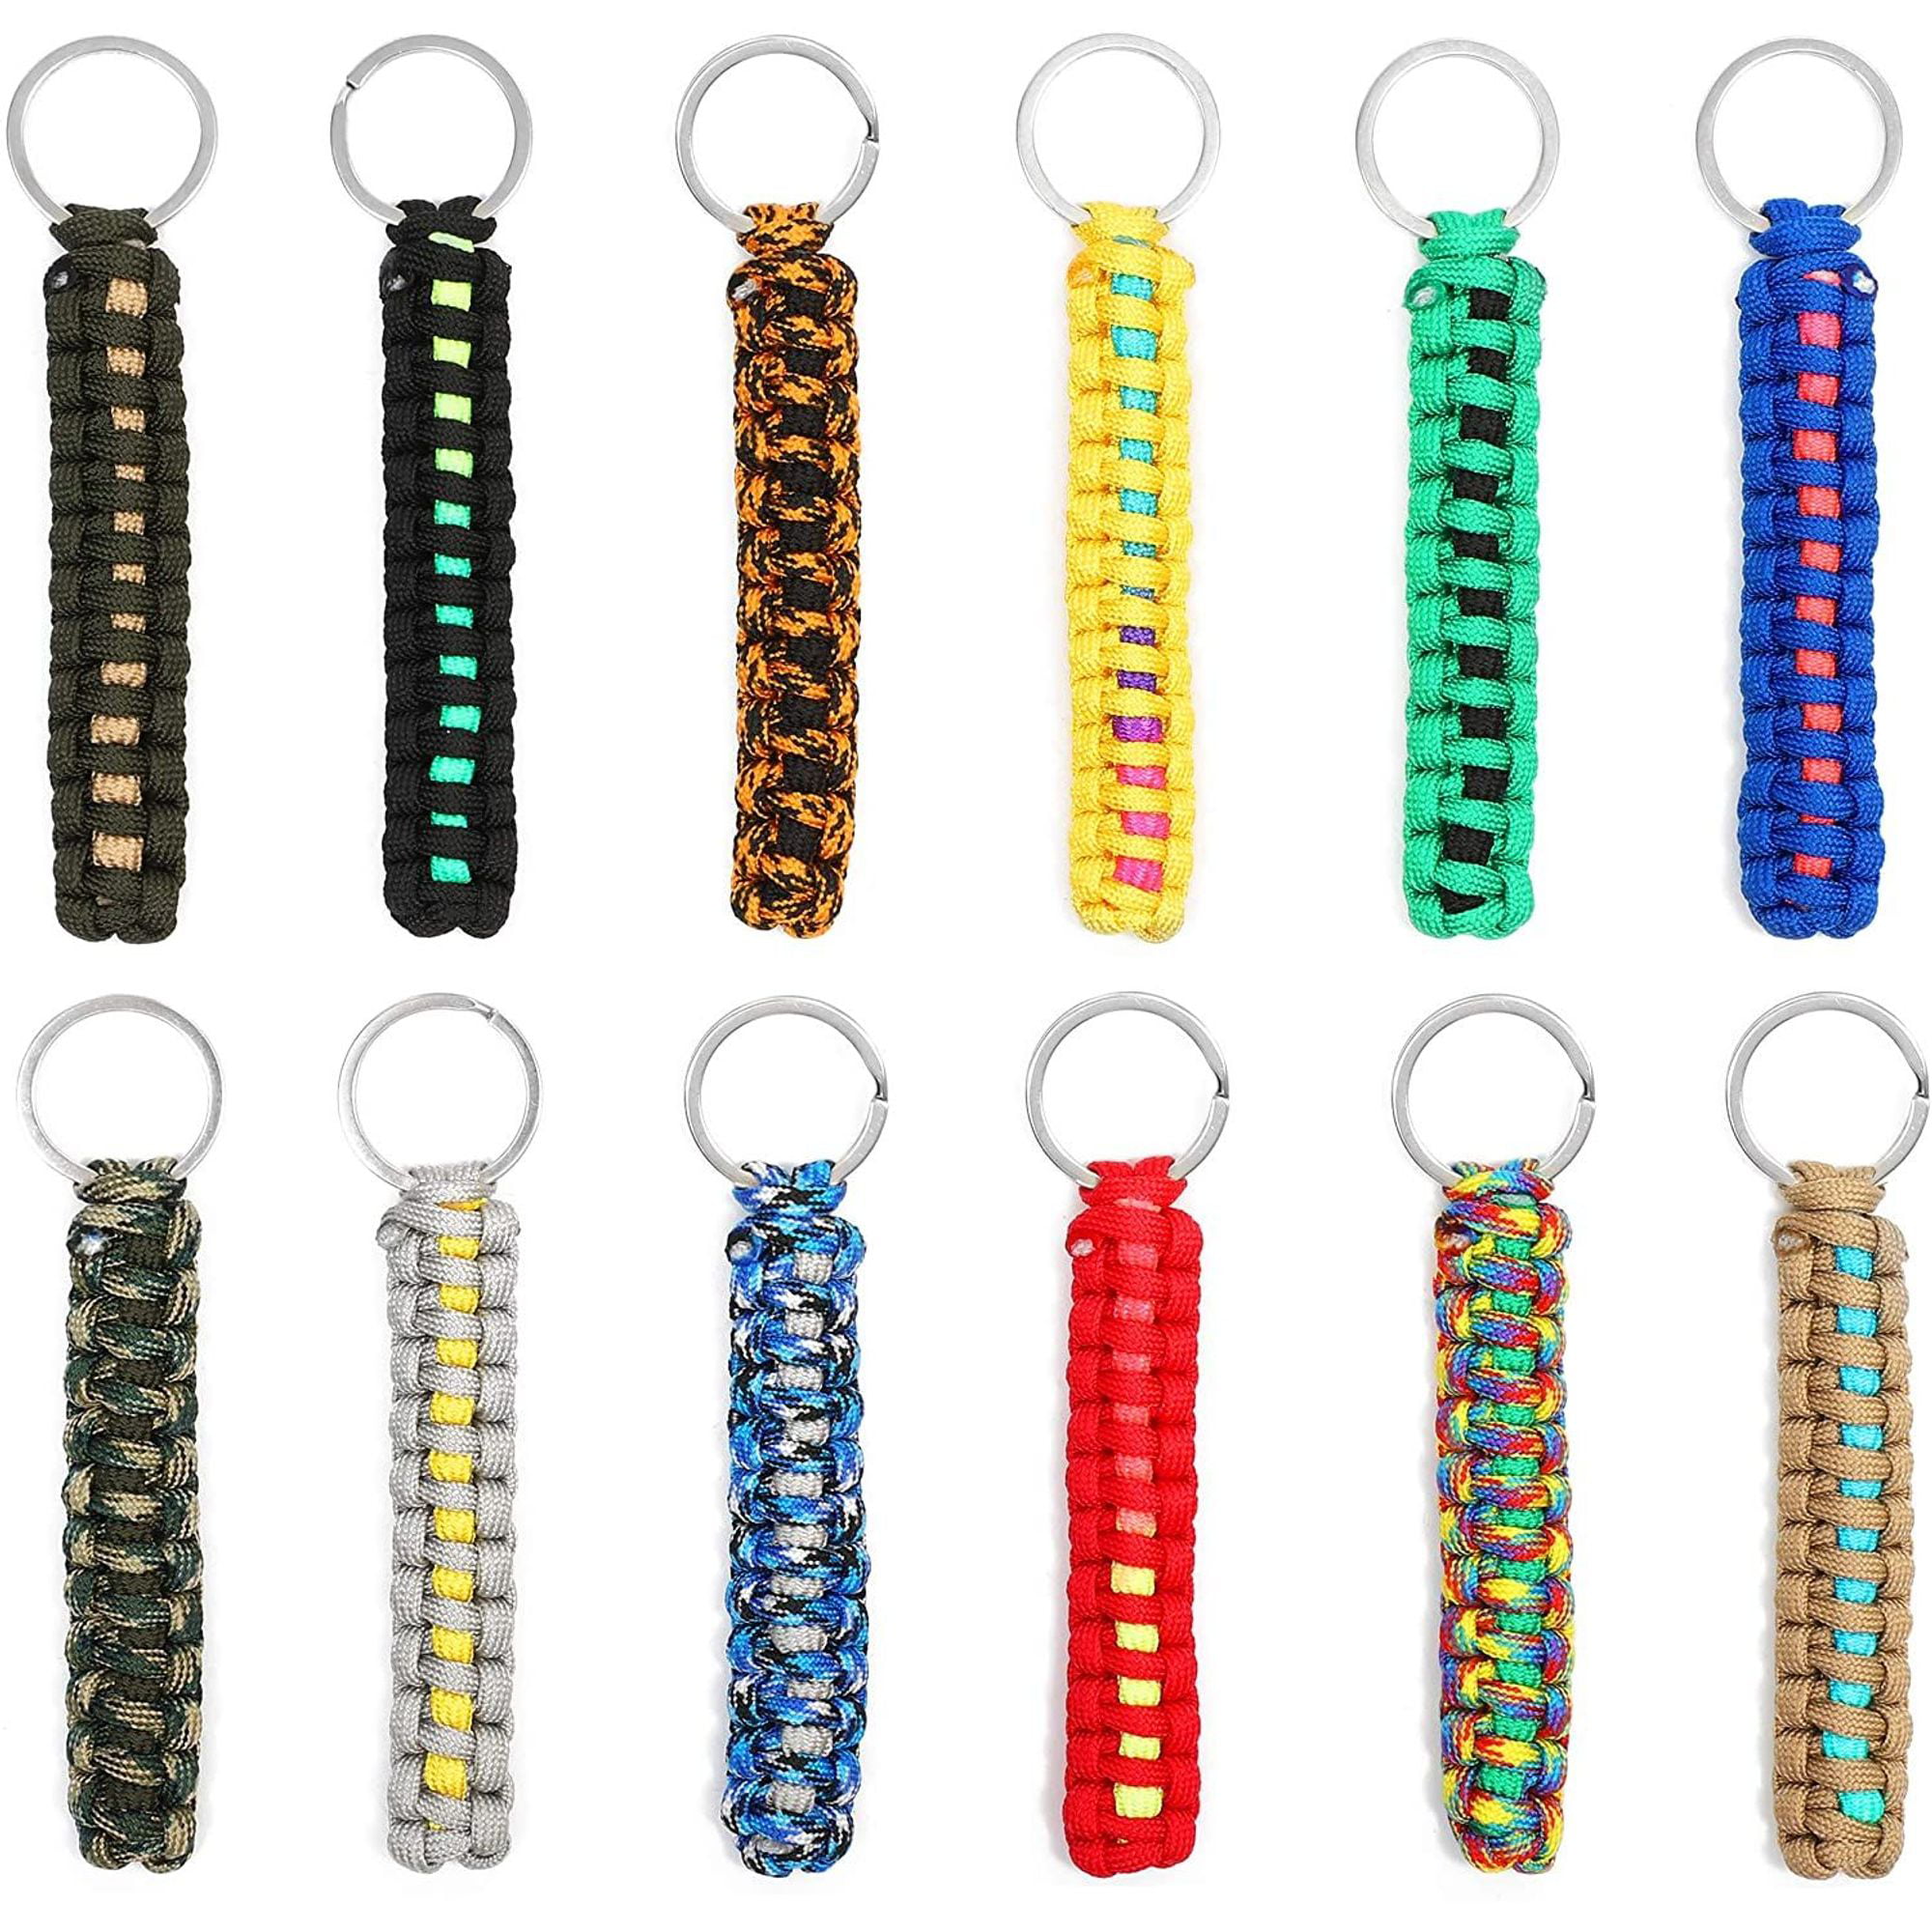 Zodaca 12 Pack Paracord Keychain With Metal Ring Colorful Braided Lanyard For Car Keys Backpacks Walmart Com Walmart Com